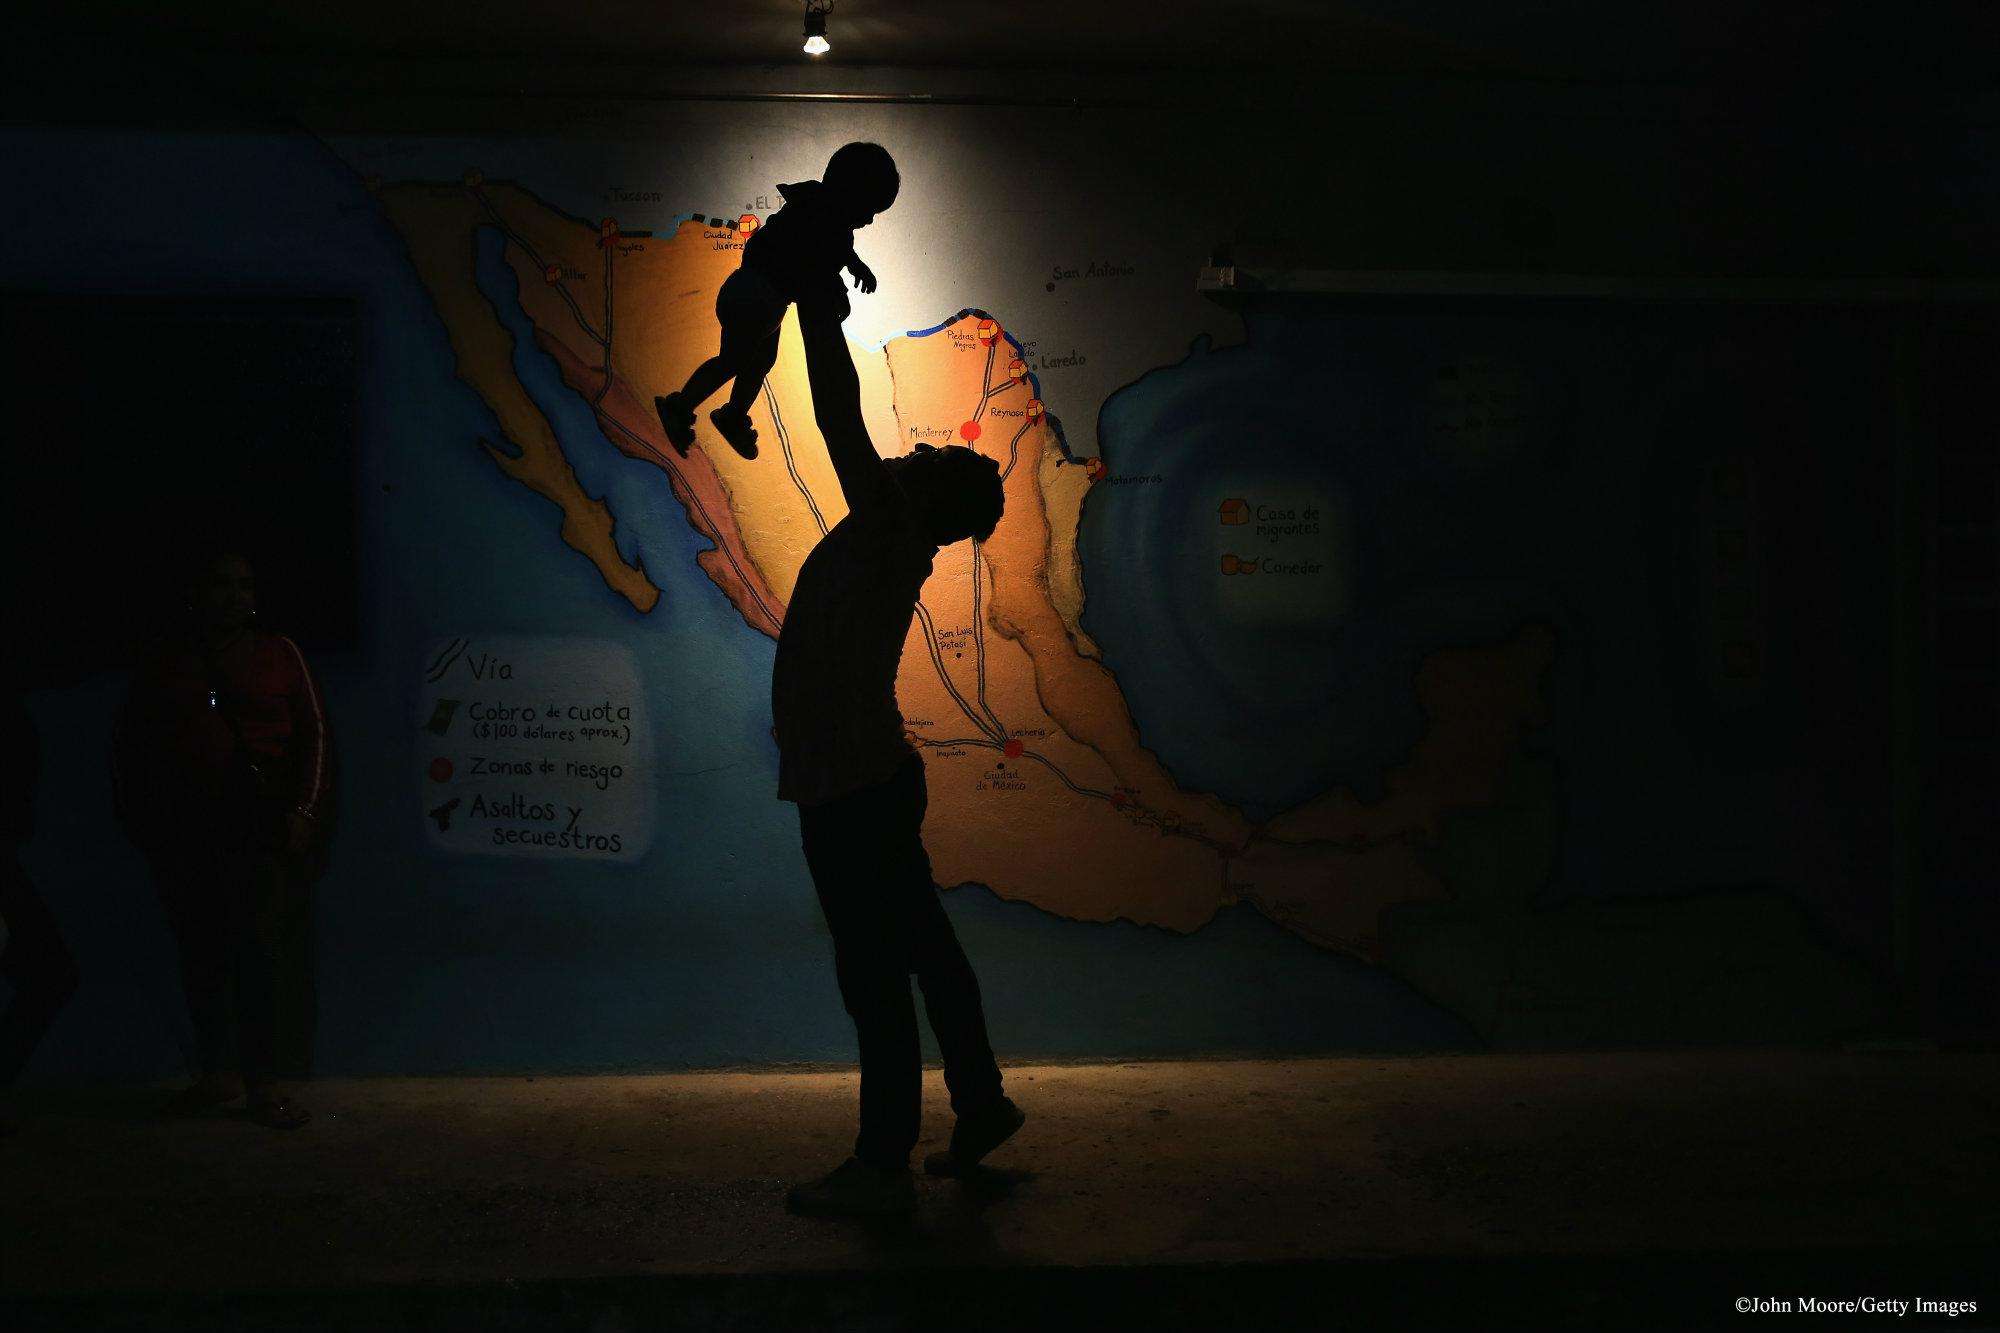 A Honduran man holds a young child at La 72 shelter in Mexico